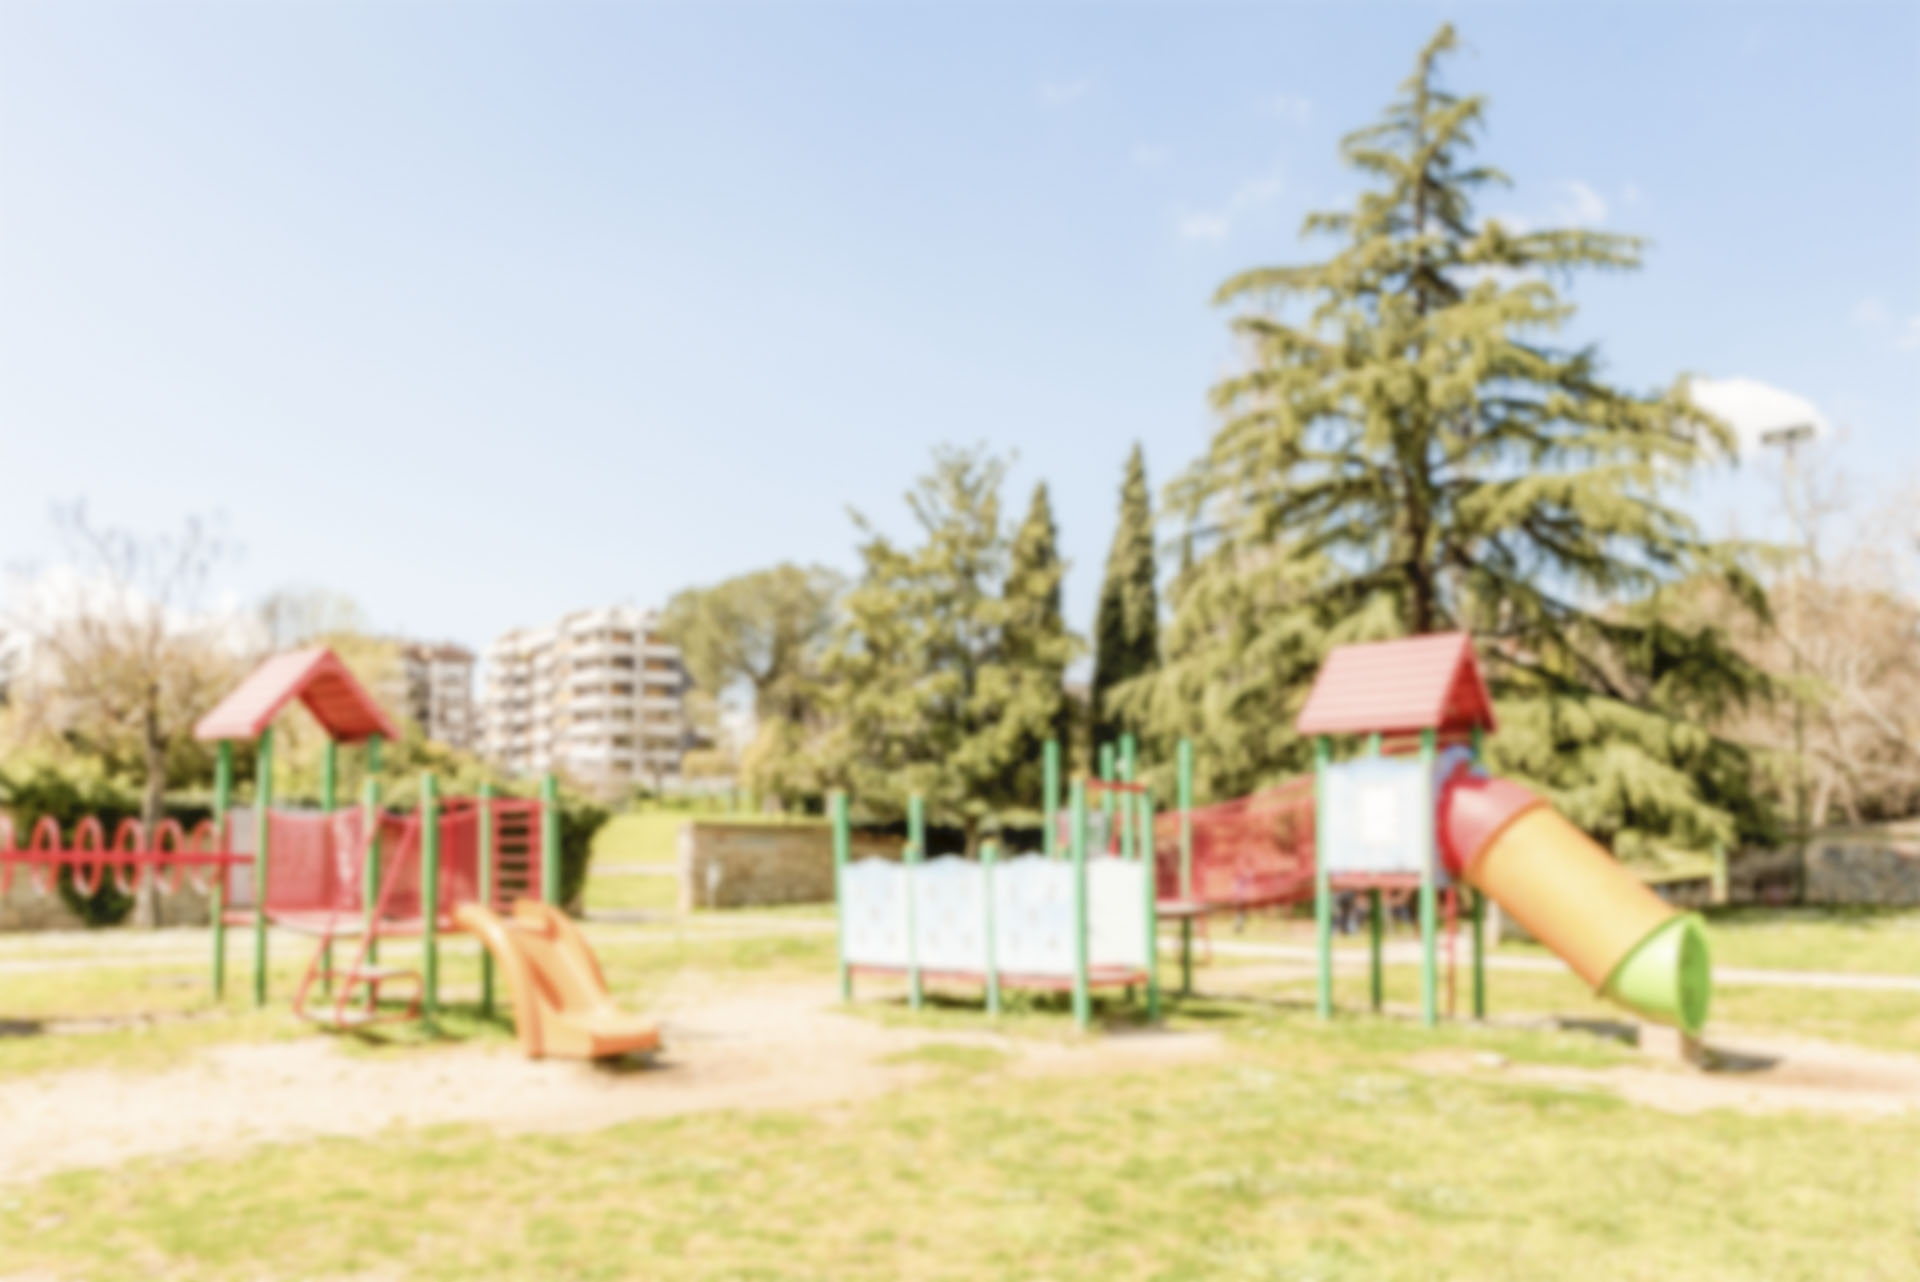 Defocused background of colorful playground for kids in public park